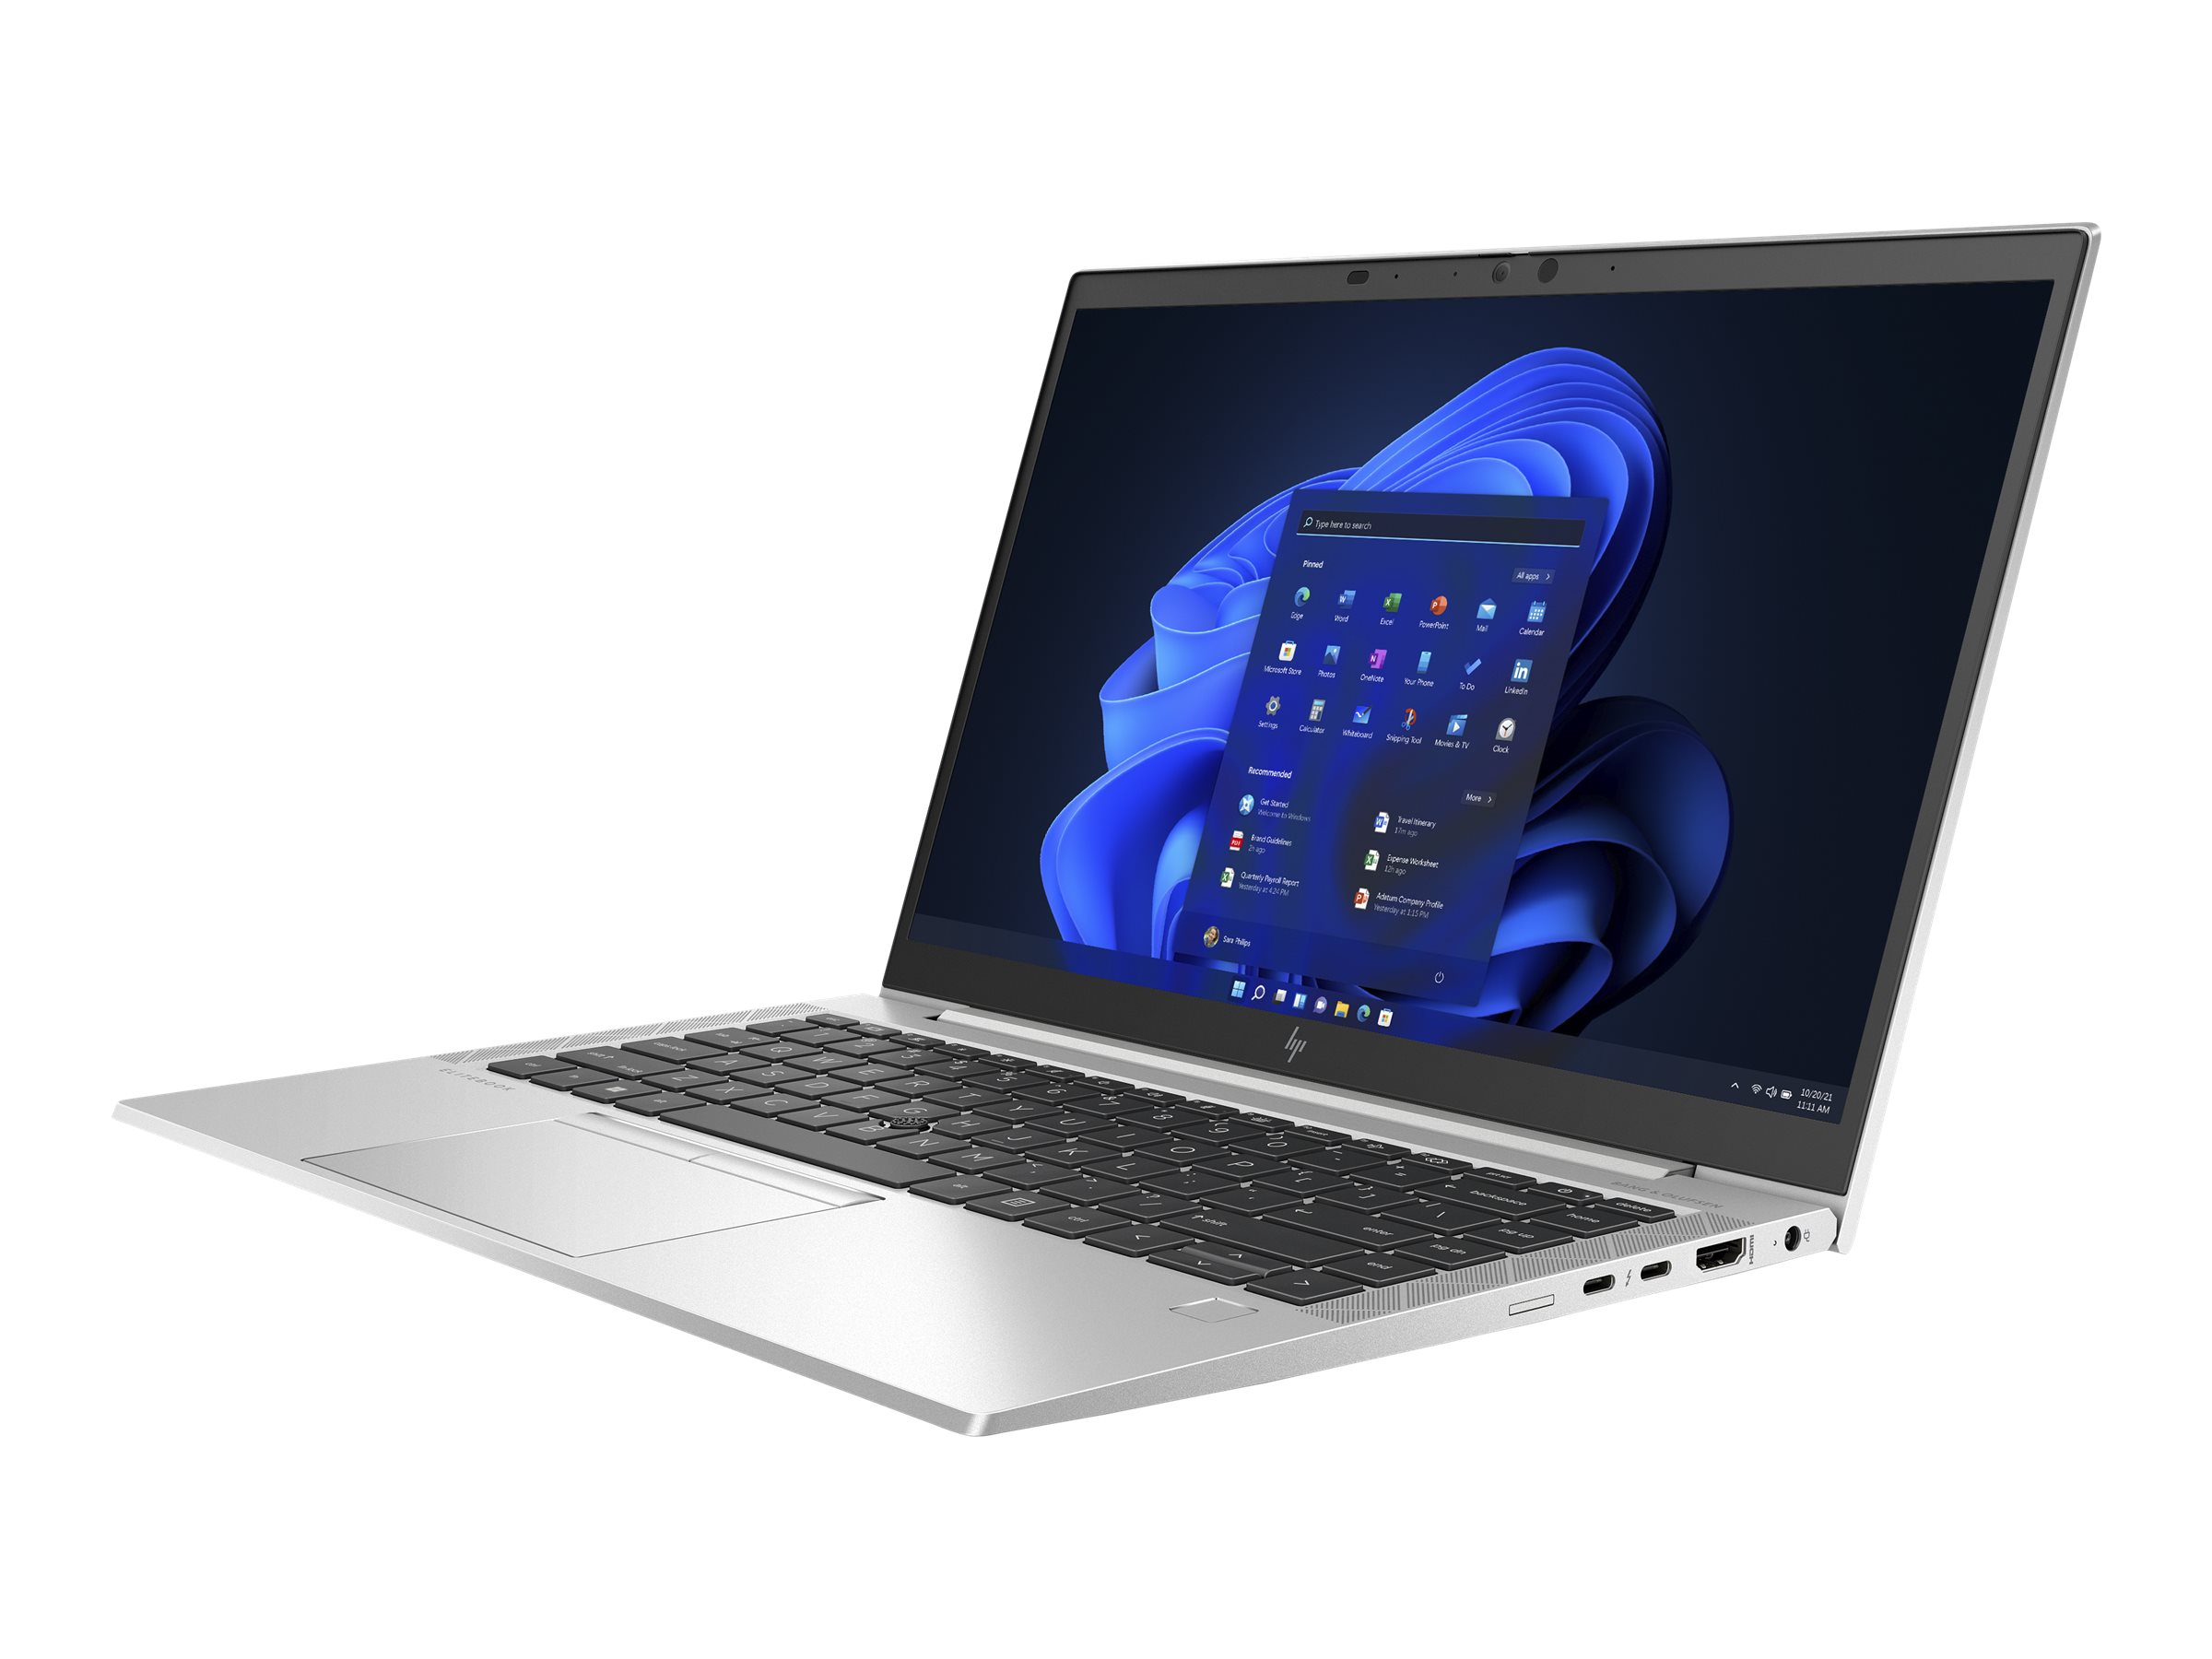 HP EliteBook 840 G8 Notebook - Wolf Pro Security - Intel Core i5 1135G7 - Win 11 Pro - Iris Xe Graphics - 8 GB RAM - 512 GB SSD NVMe, HP Value - 35.56 cm (14") -  IPS HP SureView Reflect 1920 x 1080 (Full HD) - Wi-Fi 6 - kbd: Deutsch - mit HP 3 years NBD Notebook3 Bundle Service - mit HP Wolf Pro Security Edition (1 Jahr) - B-Ware